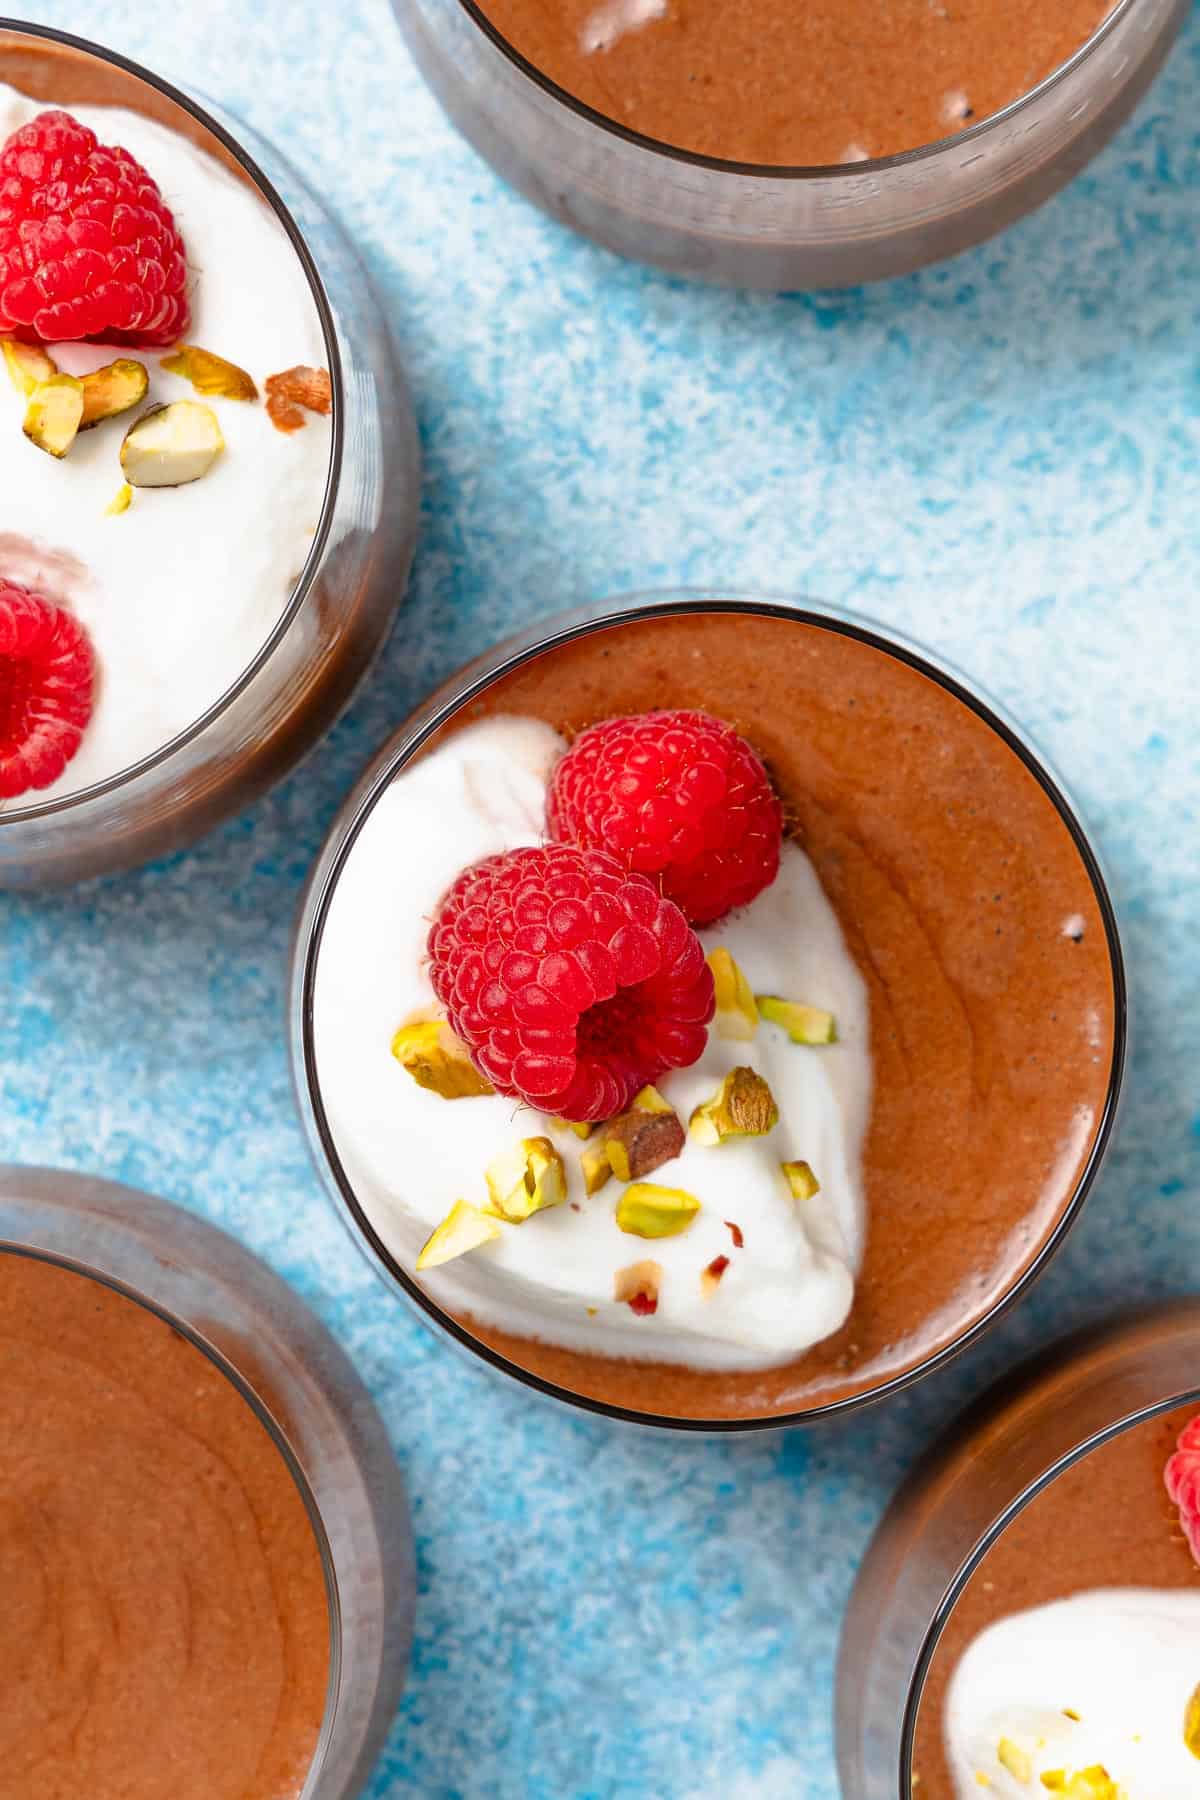 Overhead shot of chocolate mousse in glasses with whipped cream, crushed pistachios, and fresh raspberries on top.